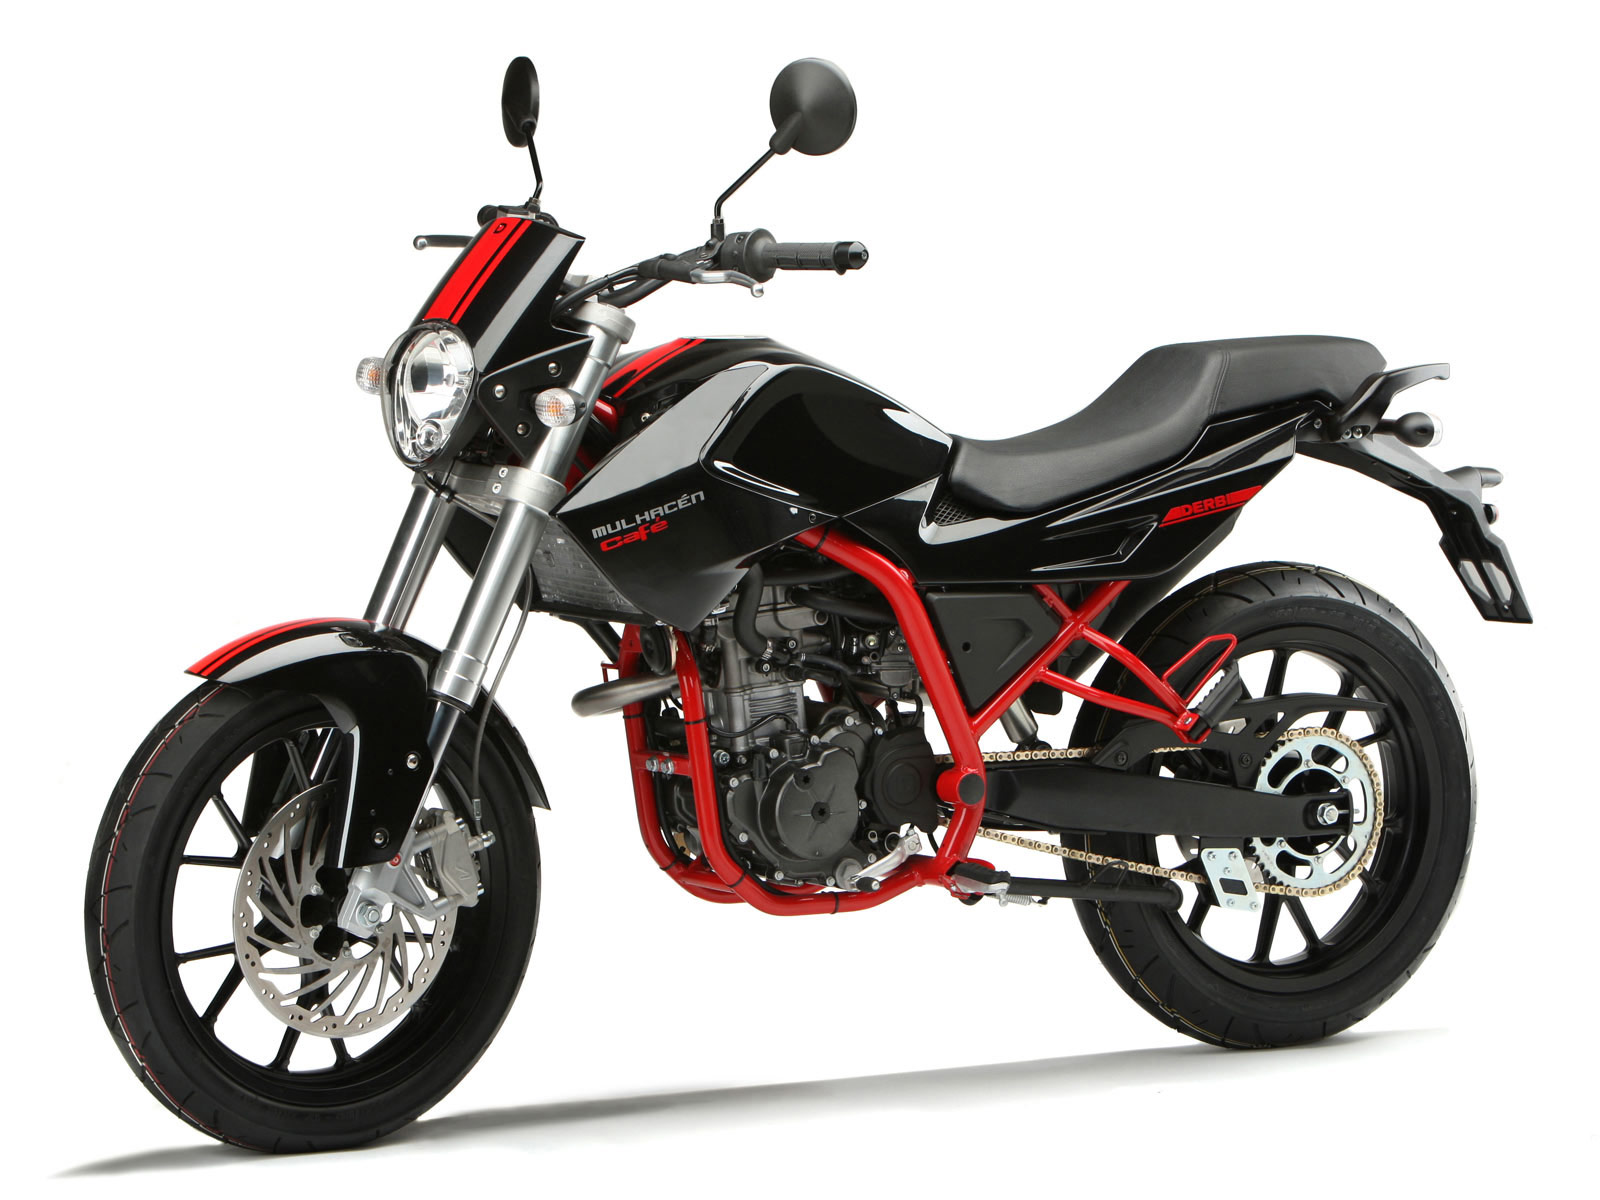 derbi motorcycles image search results